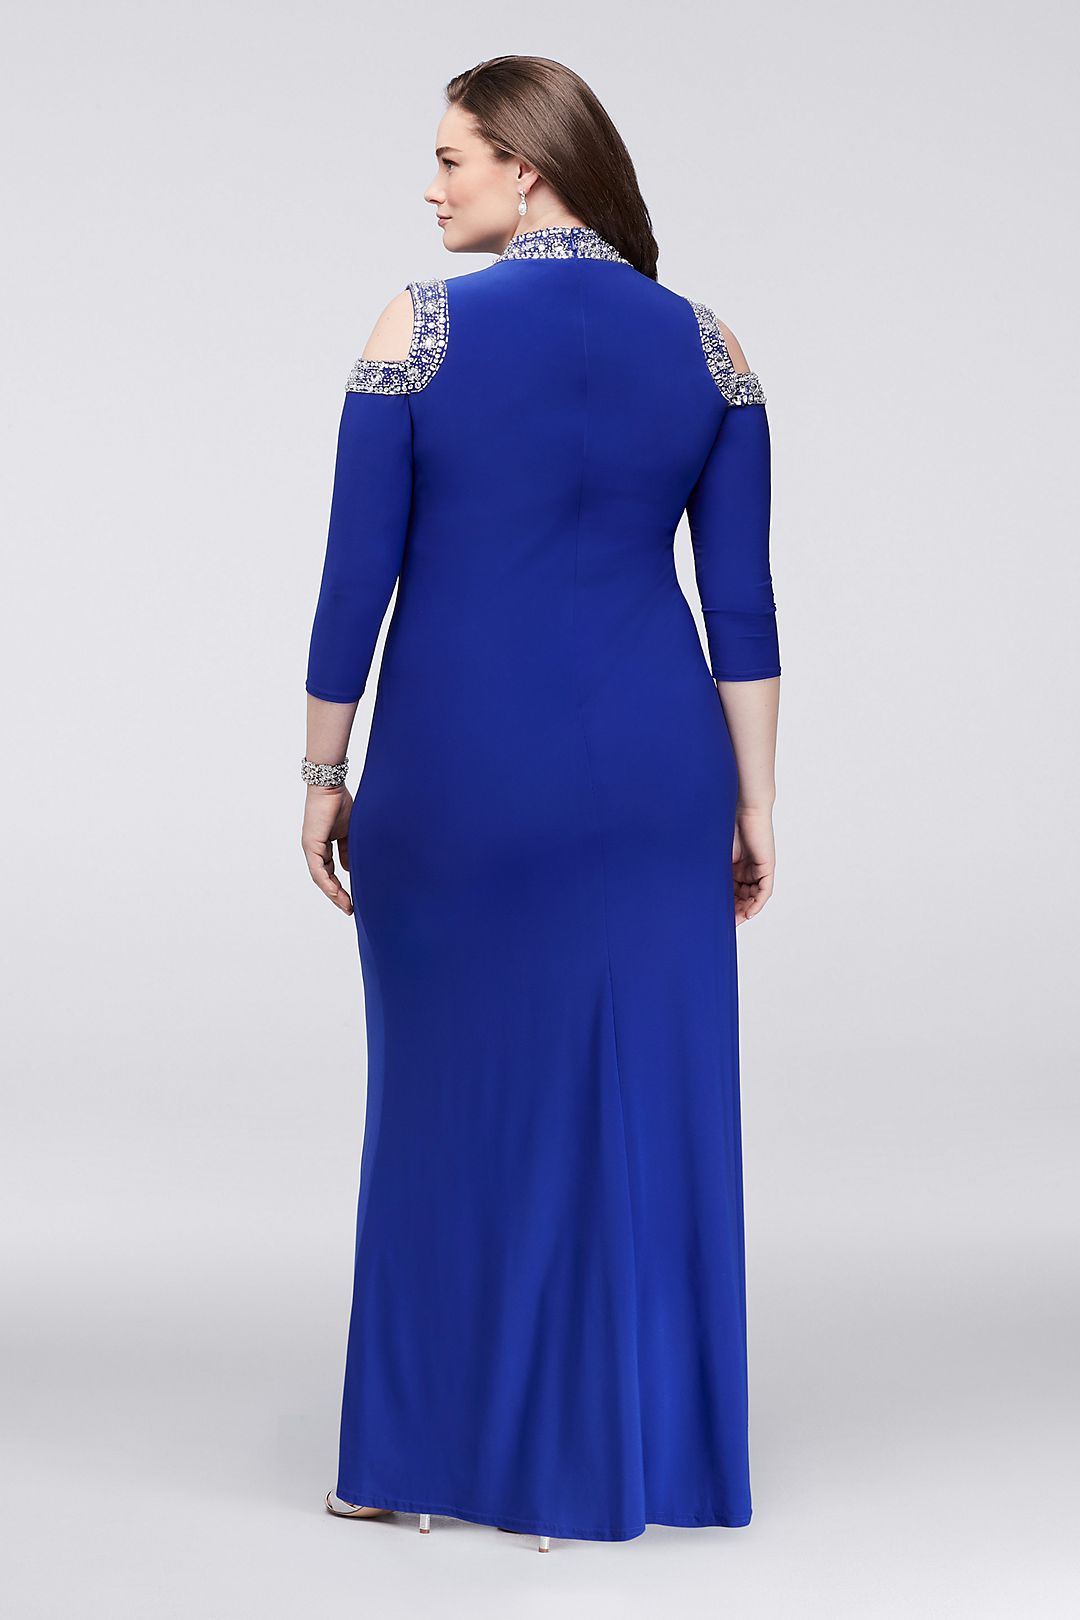 Crystal-Beaded Cold Shoulder Jersey Gown Image 4